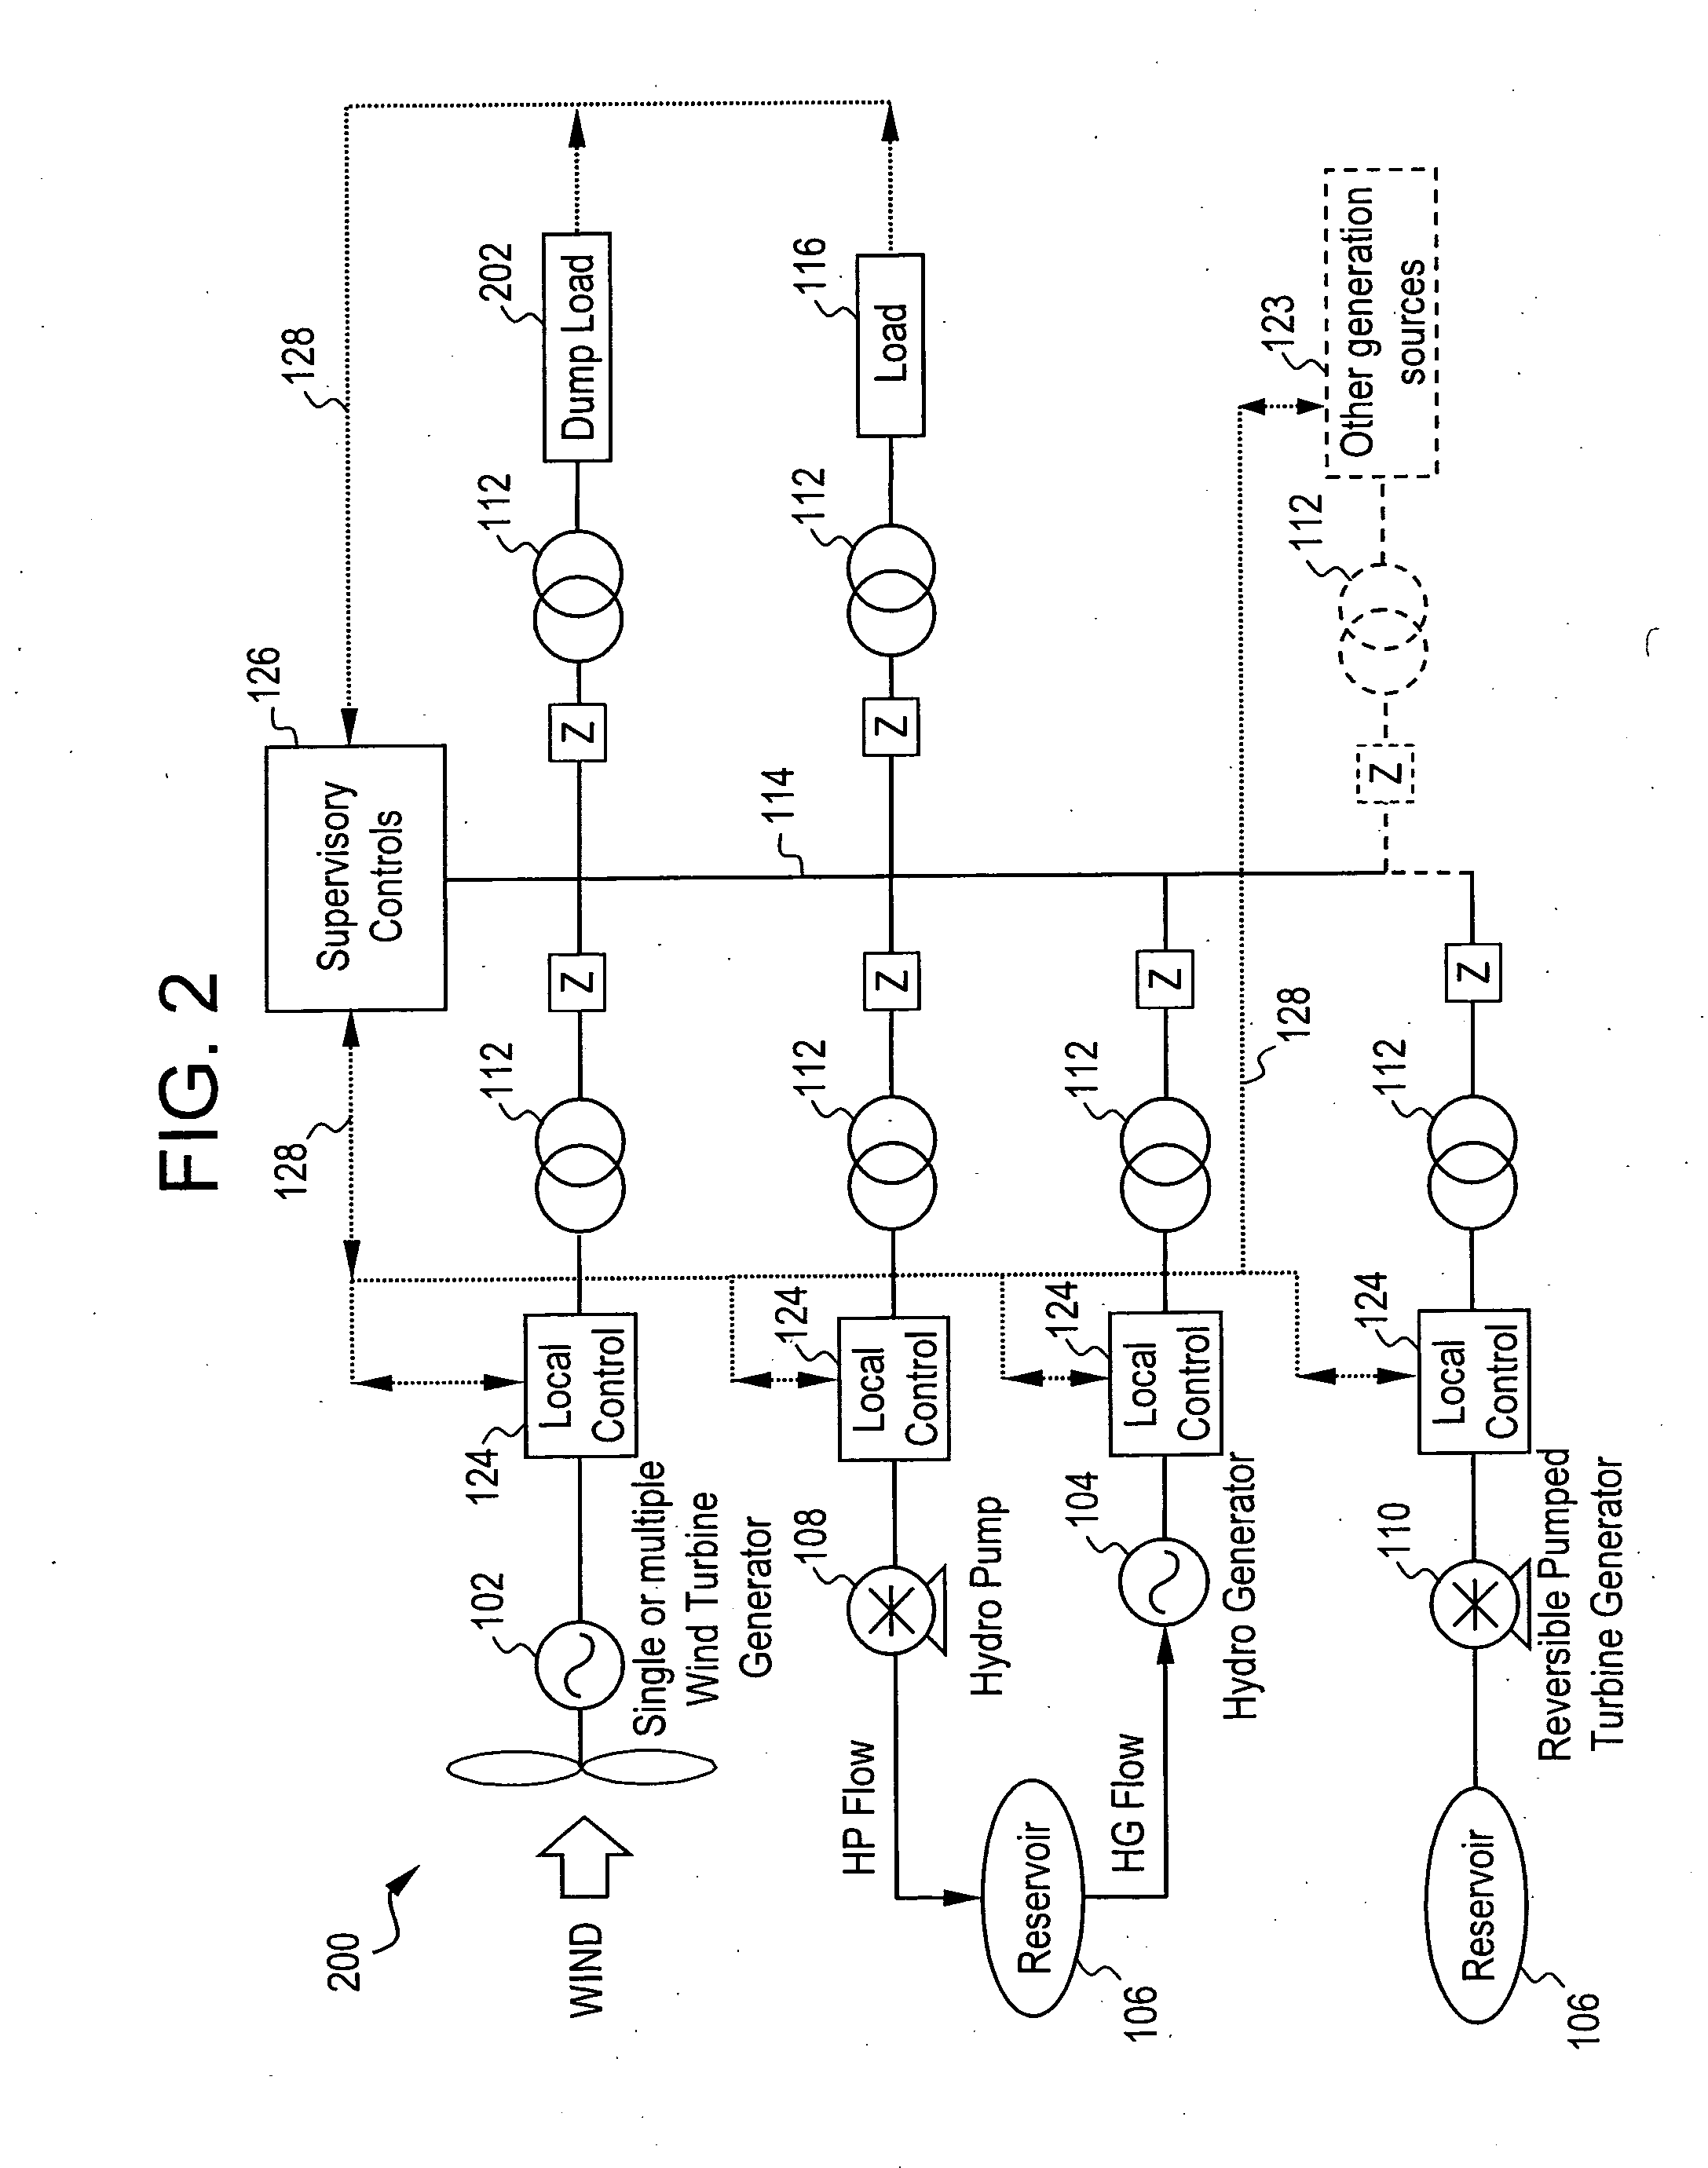 System and method for integrating wind and hydroelectric generation and pumped hydro energy storage systems